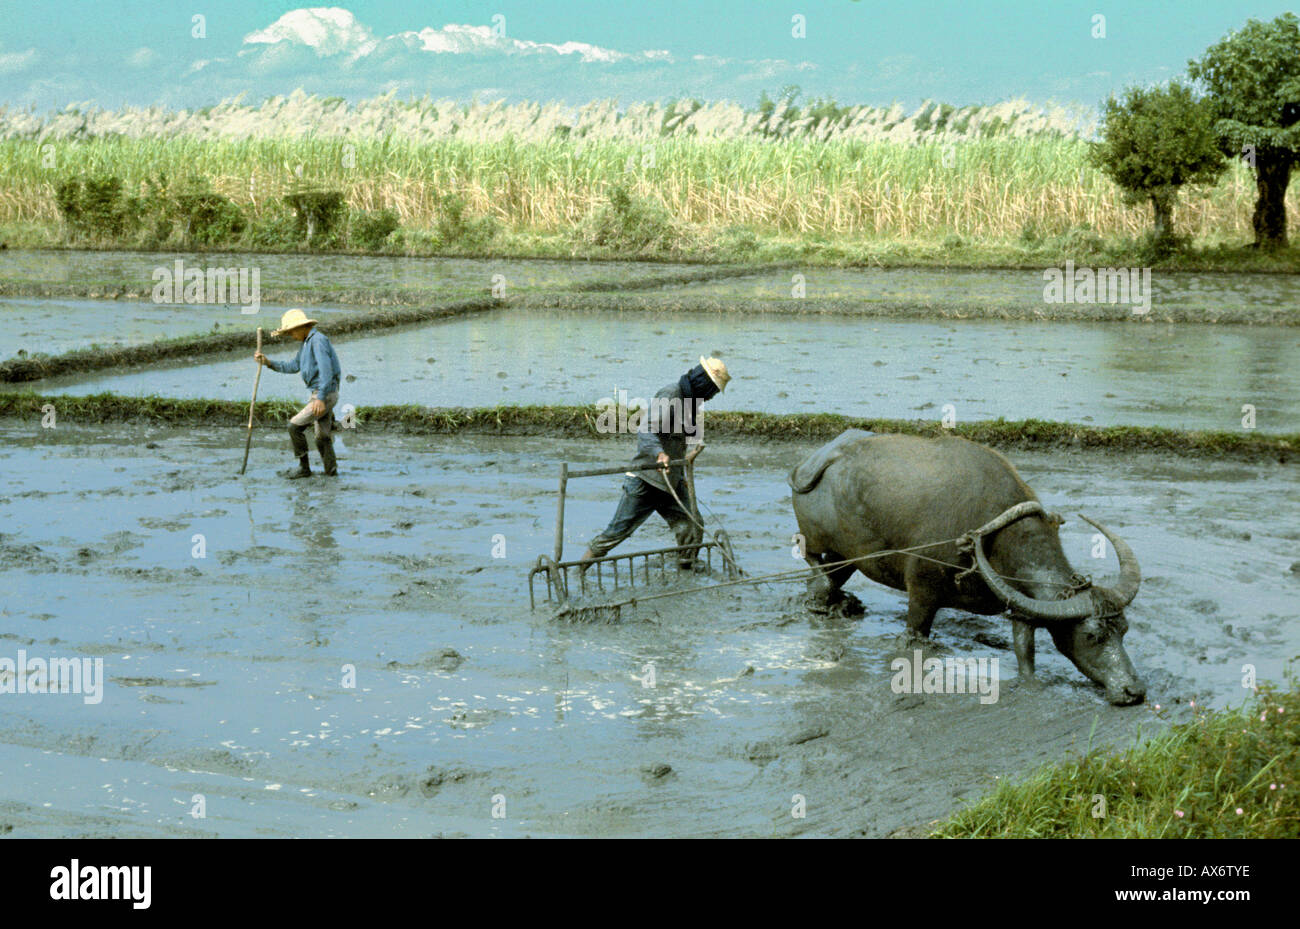 Wet rice ploughing with water buffalo Philippines Stock Photo